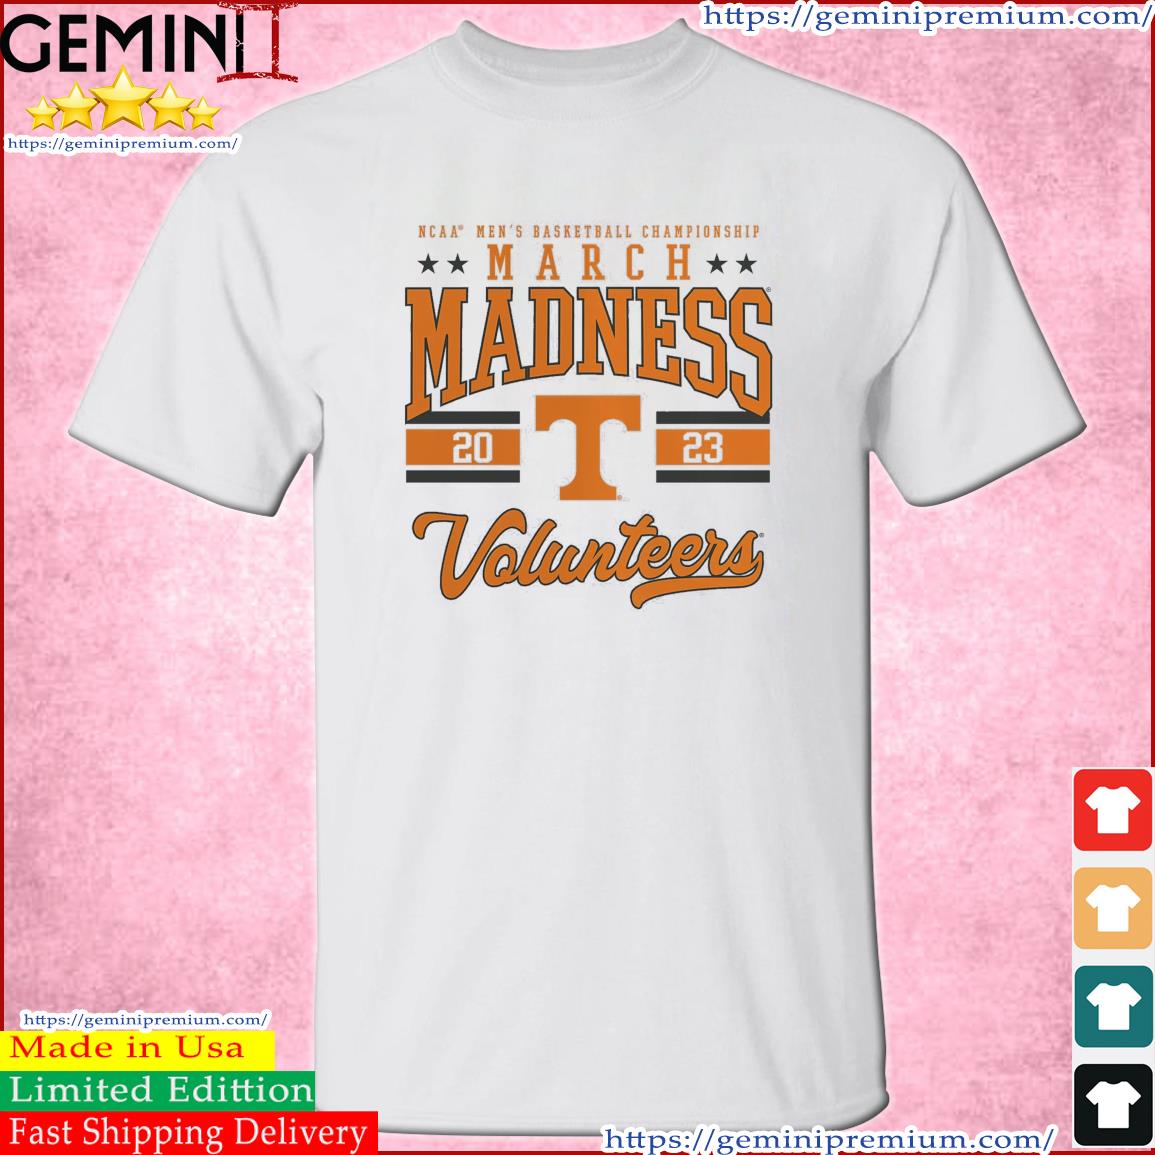 Tennessee Volunteers NCAA Men's Basketball Tournament March Madness 2023 Shirt